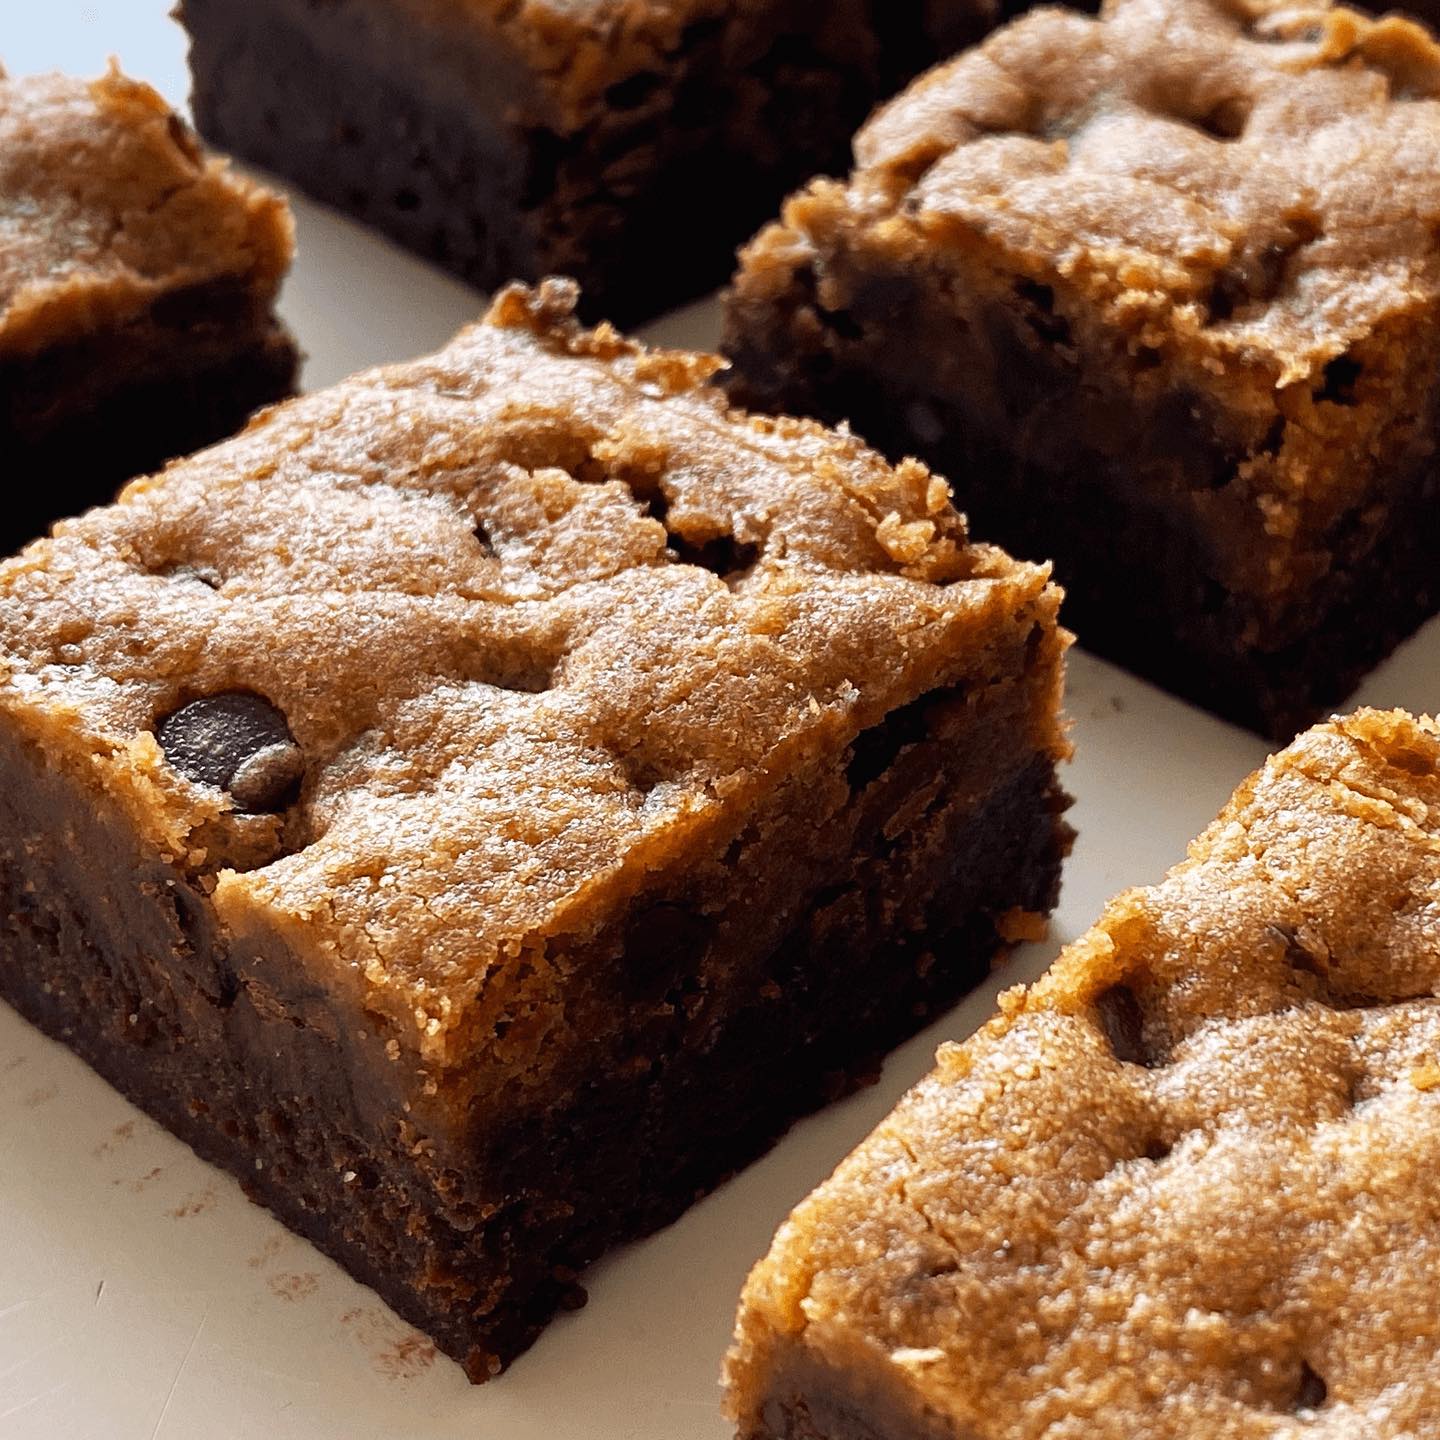 Brownies covered with chocolate chip cookie dough.🍫🍪Find the recipe here: https://youtu.be/5FztD4E14MQ 

#Cookies #Recipe #Brownies #CookieBrownies #Brookies